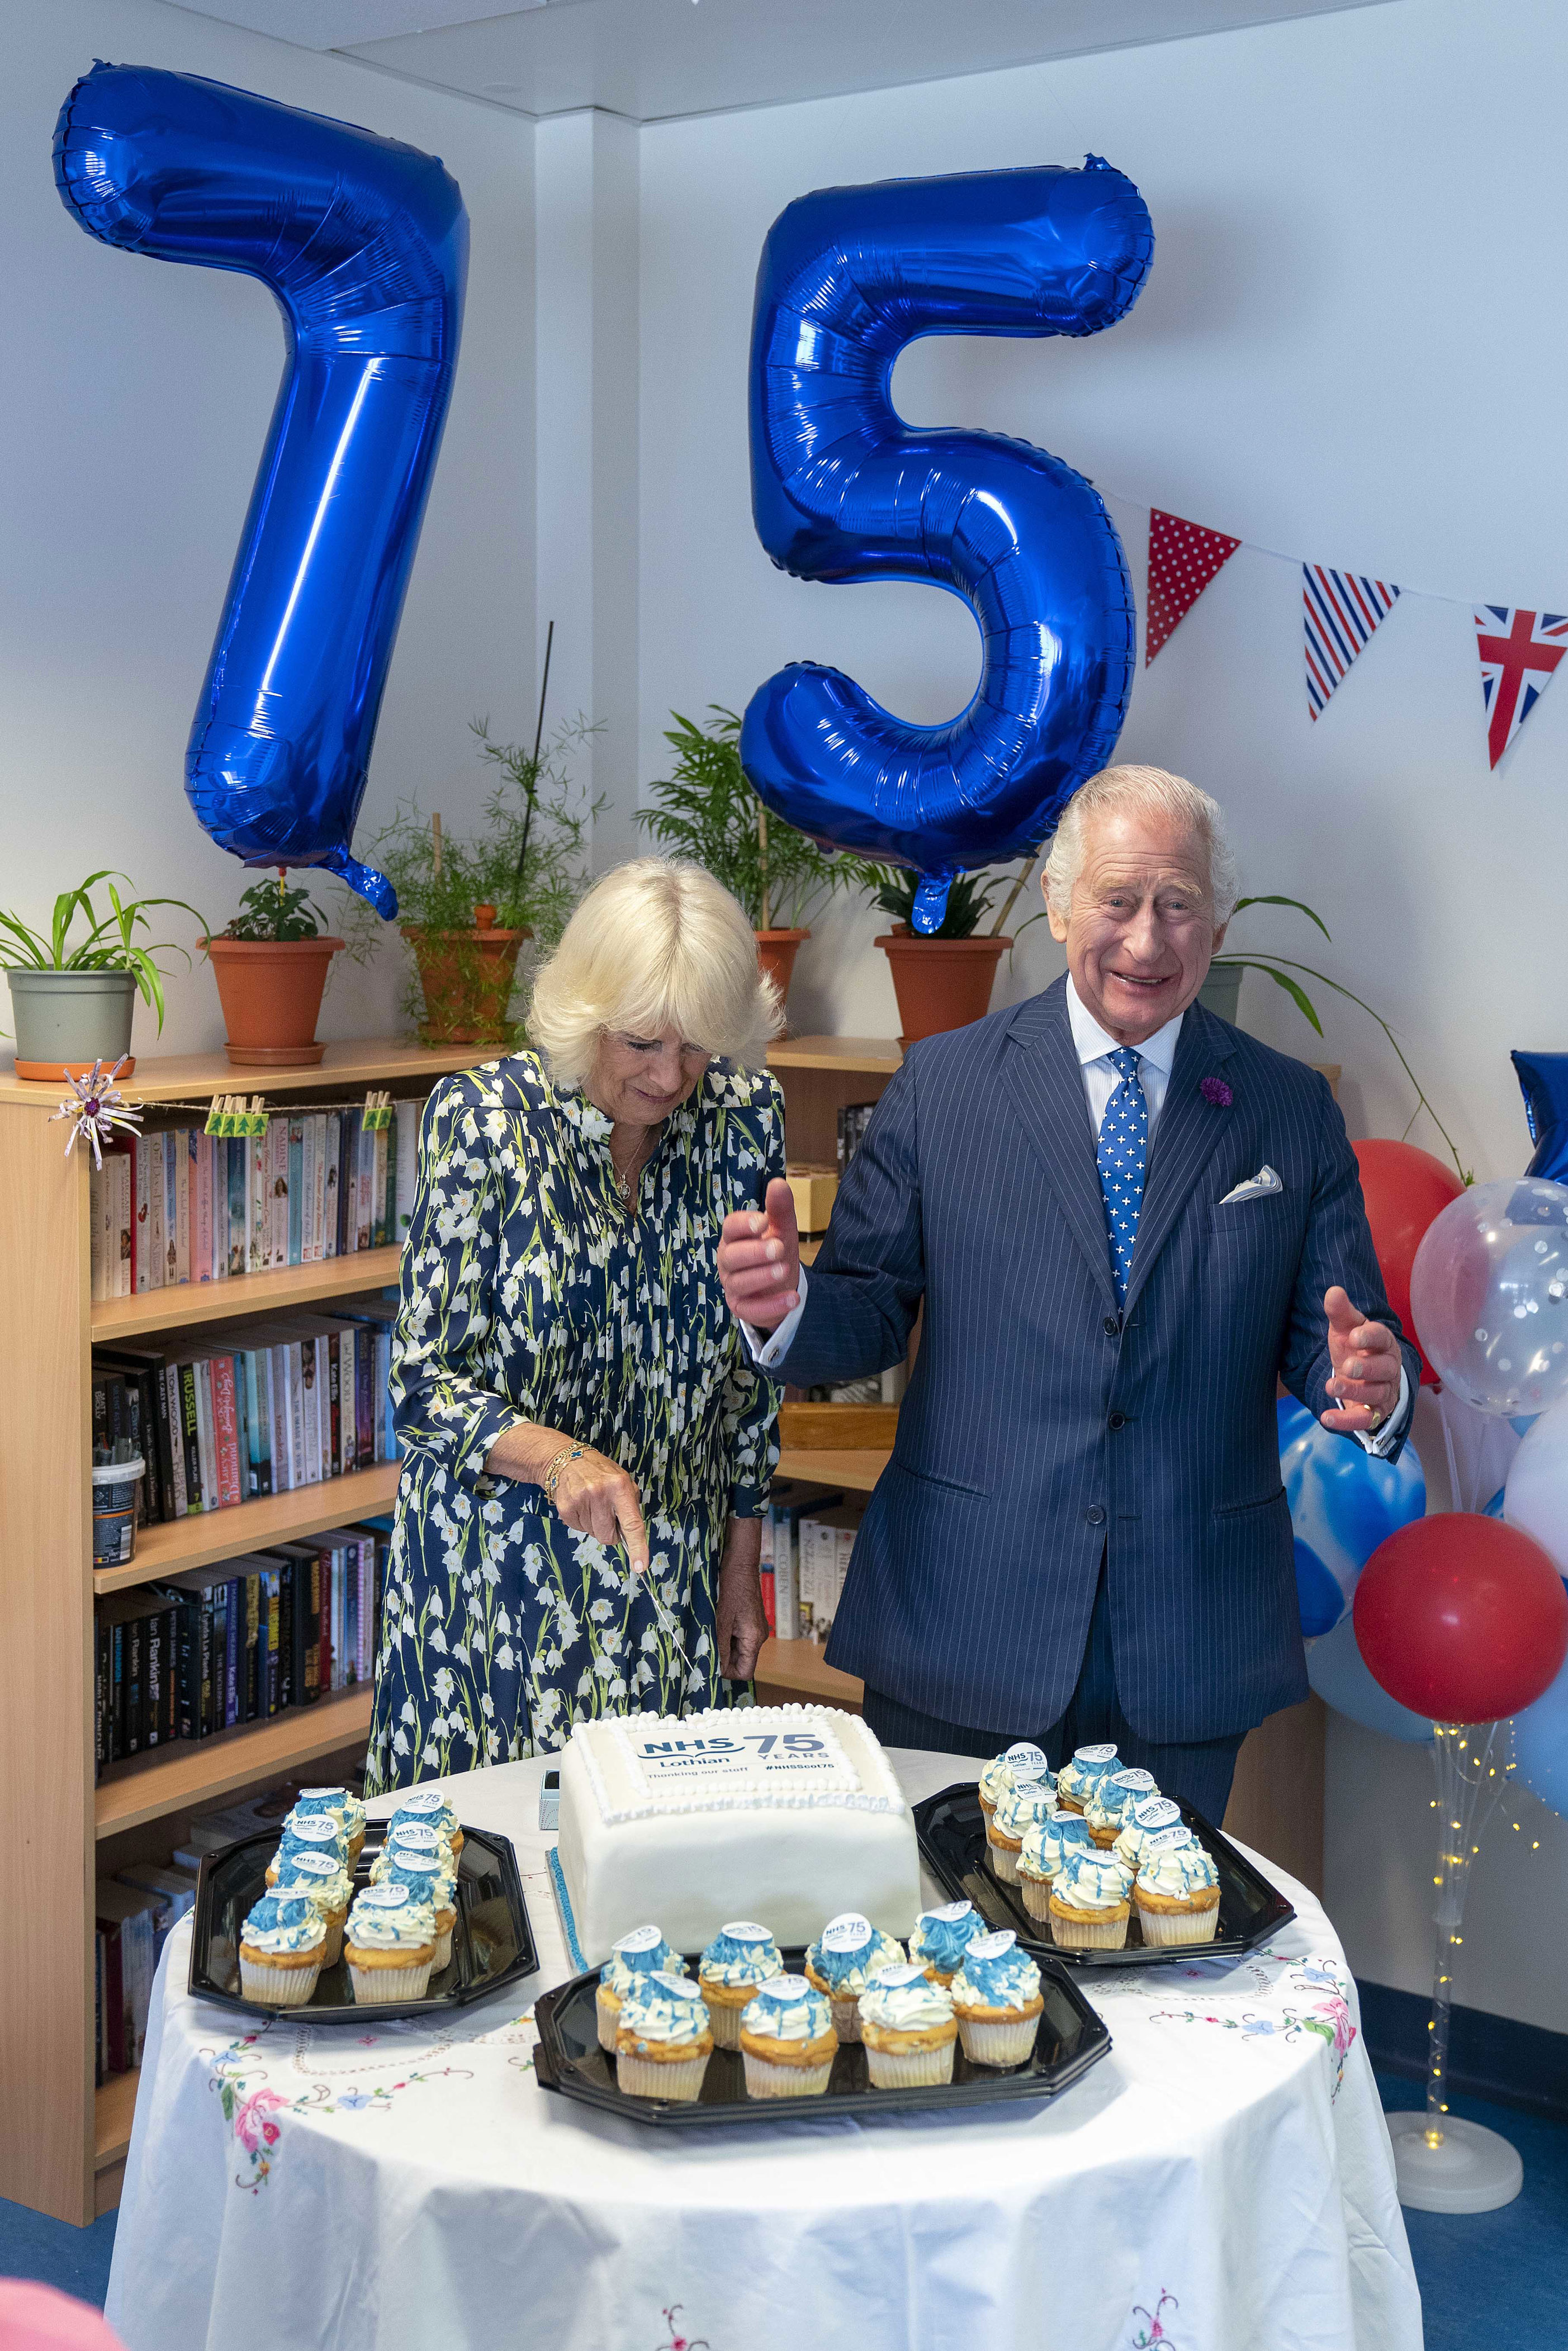 <p>King Charles III and Queen Camilla cut a commemorative cake during a visit to NHS Lothian's Medicine of the Elderly Meaningful Activity Centre at the Royal Infirmary of Edinburgh in Scotland to celebrate 75 years of Britain's National Health Service on July 4, 2023.</p>